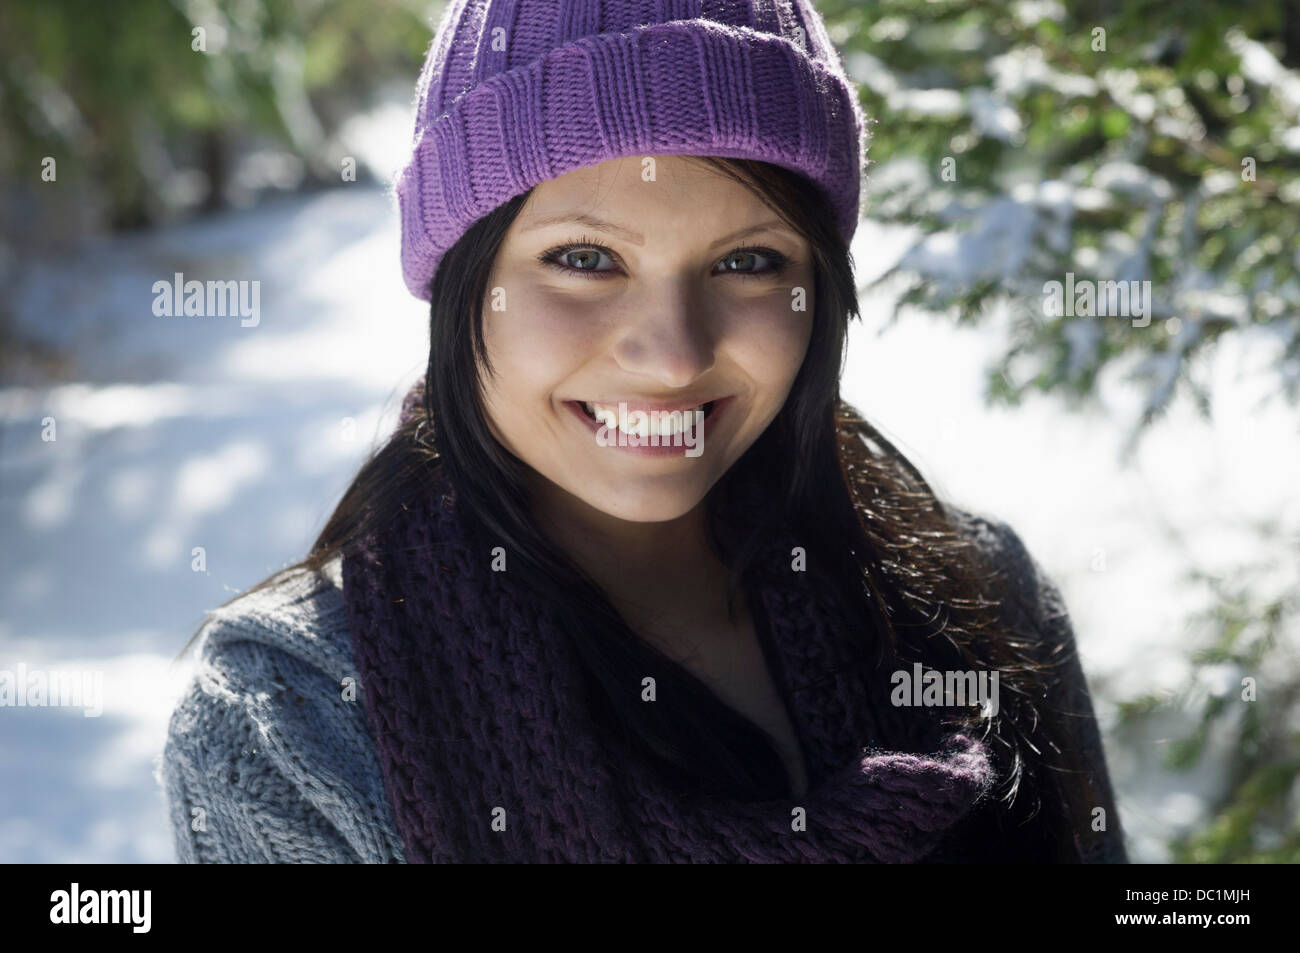 Close up portrait of young female wearing knitted hat Stock Photo